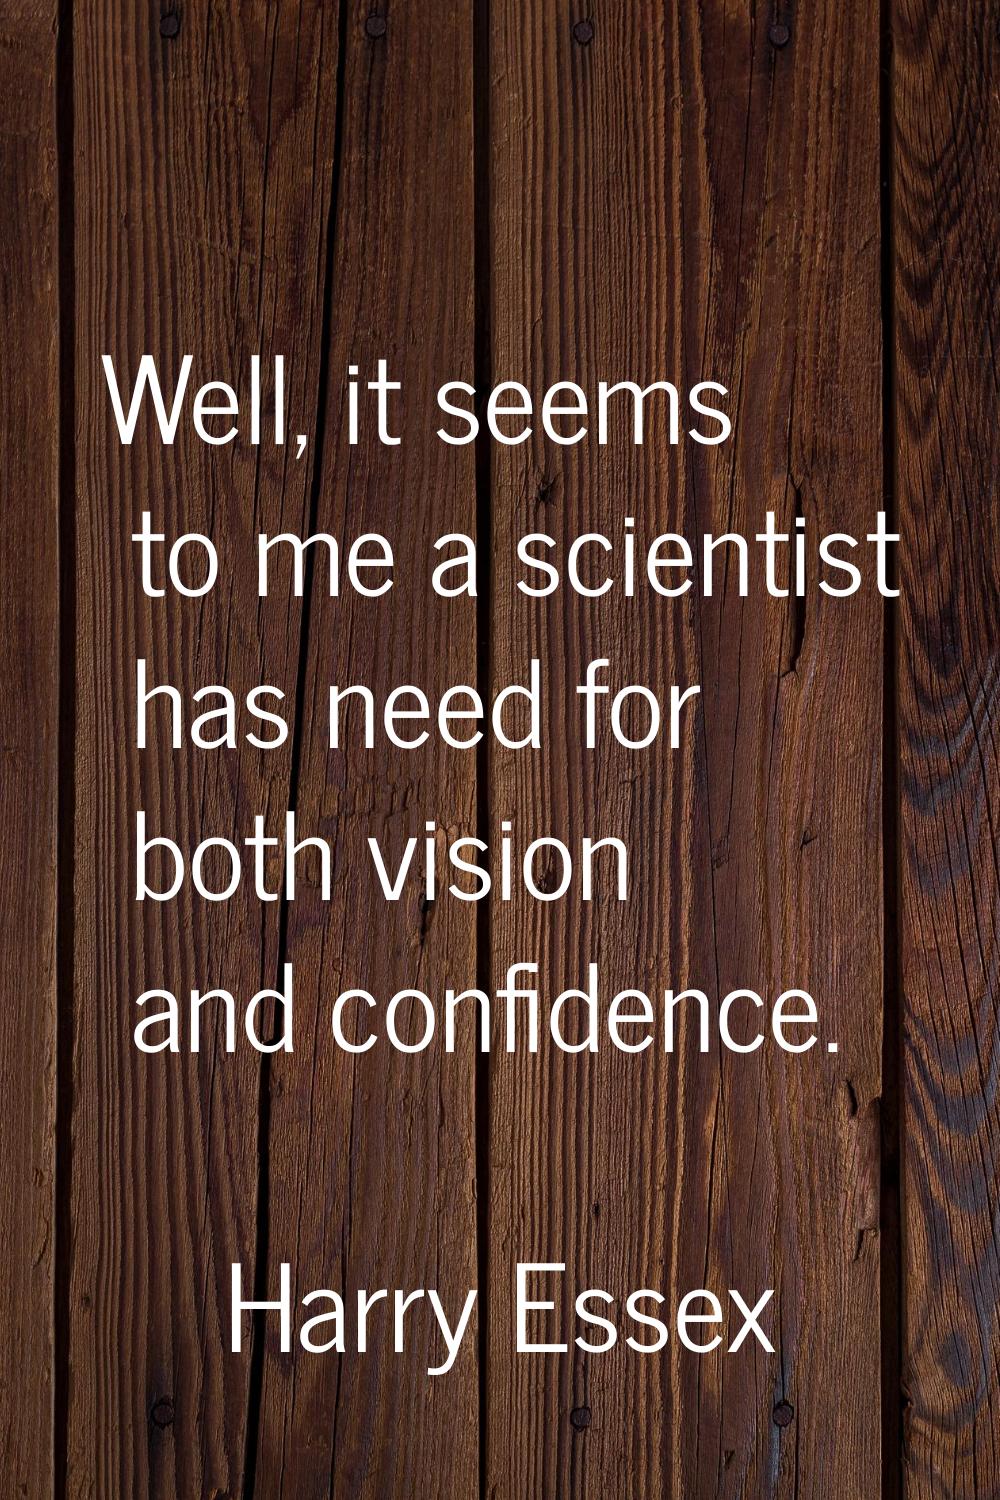 Well, it seems to me a scientist has need for both vision and confidence.